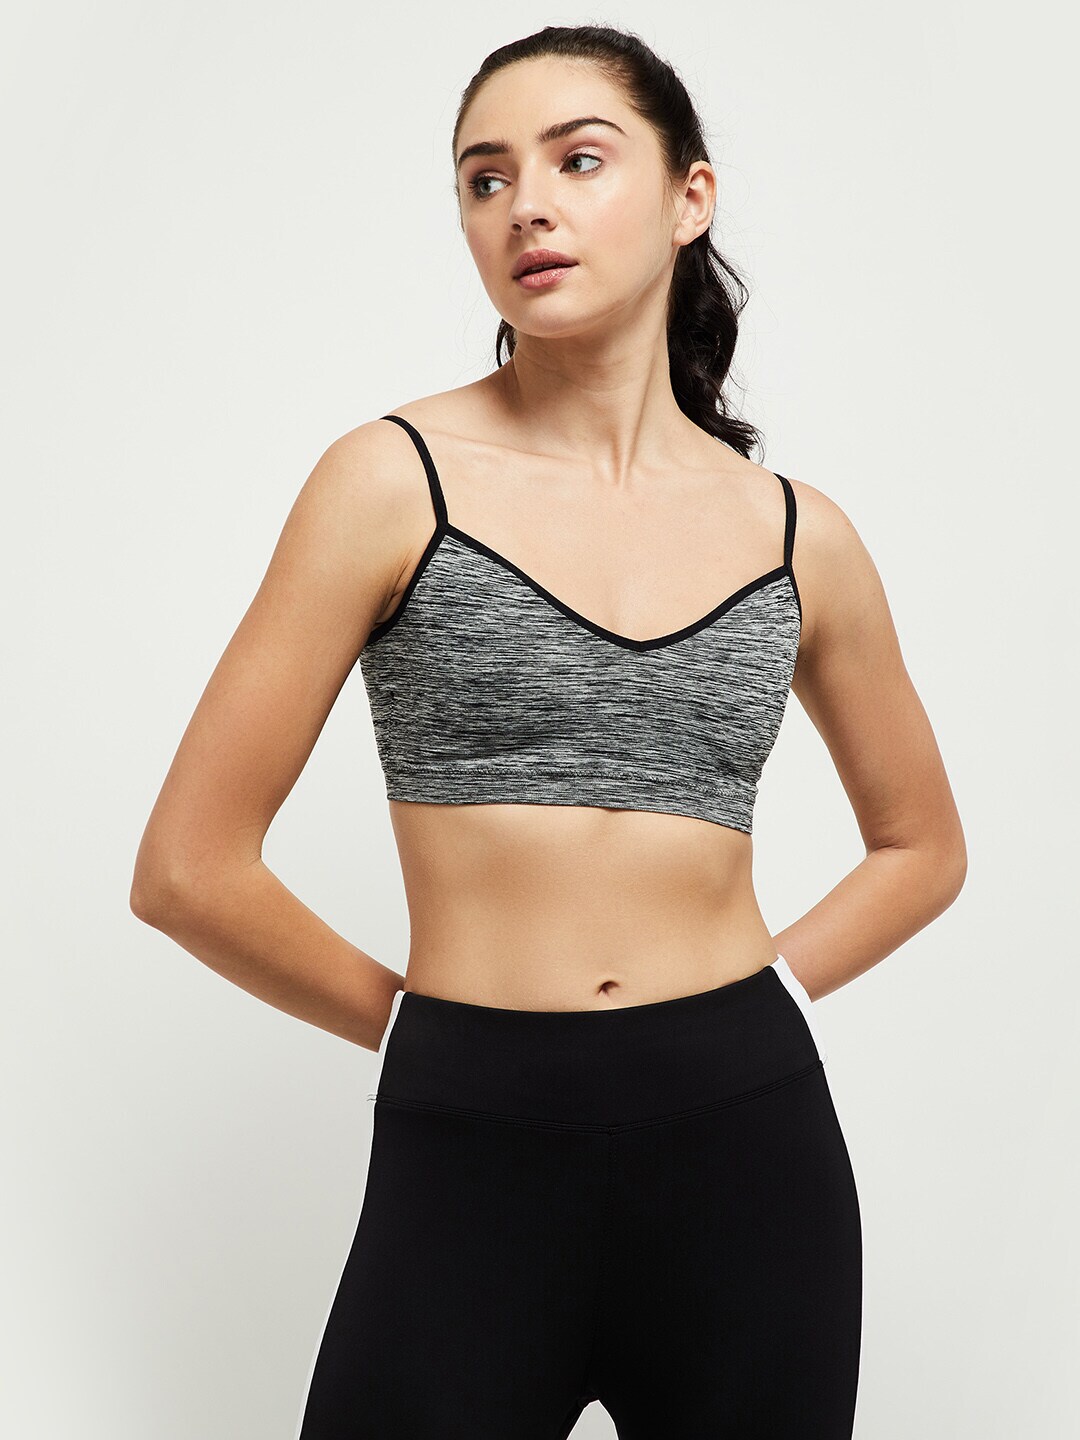 max Black & Grey Workout Bra Full Coverage Underwired Lightly Padded Price in India